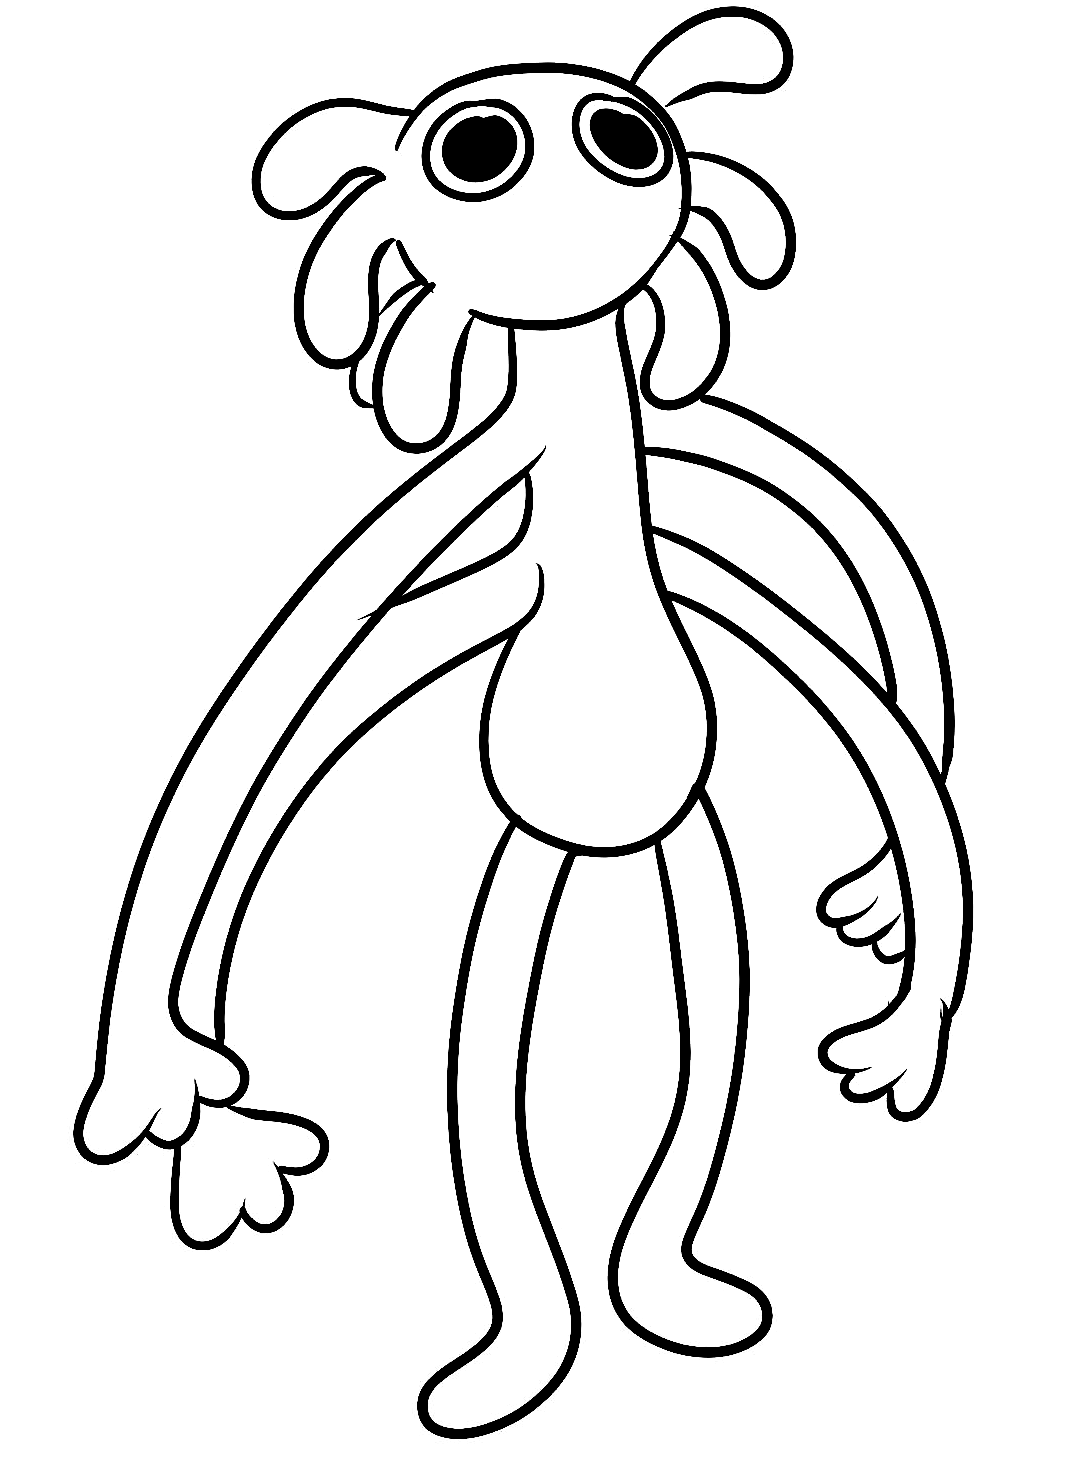 Yellow Spider from Rainbow Friends Coloring Page